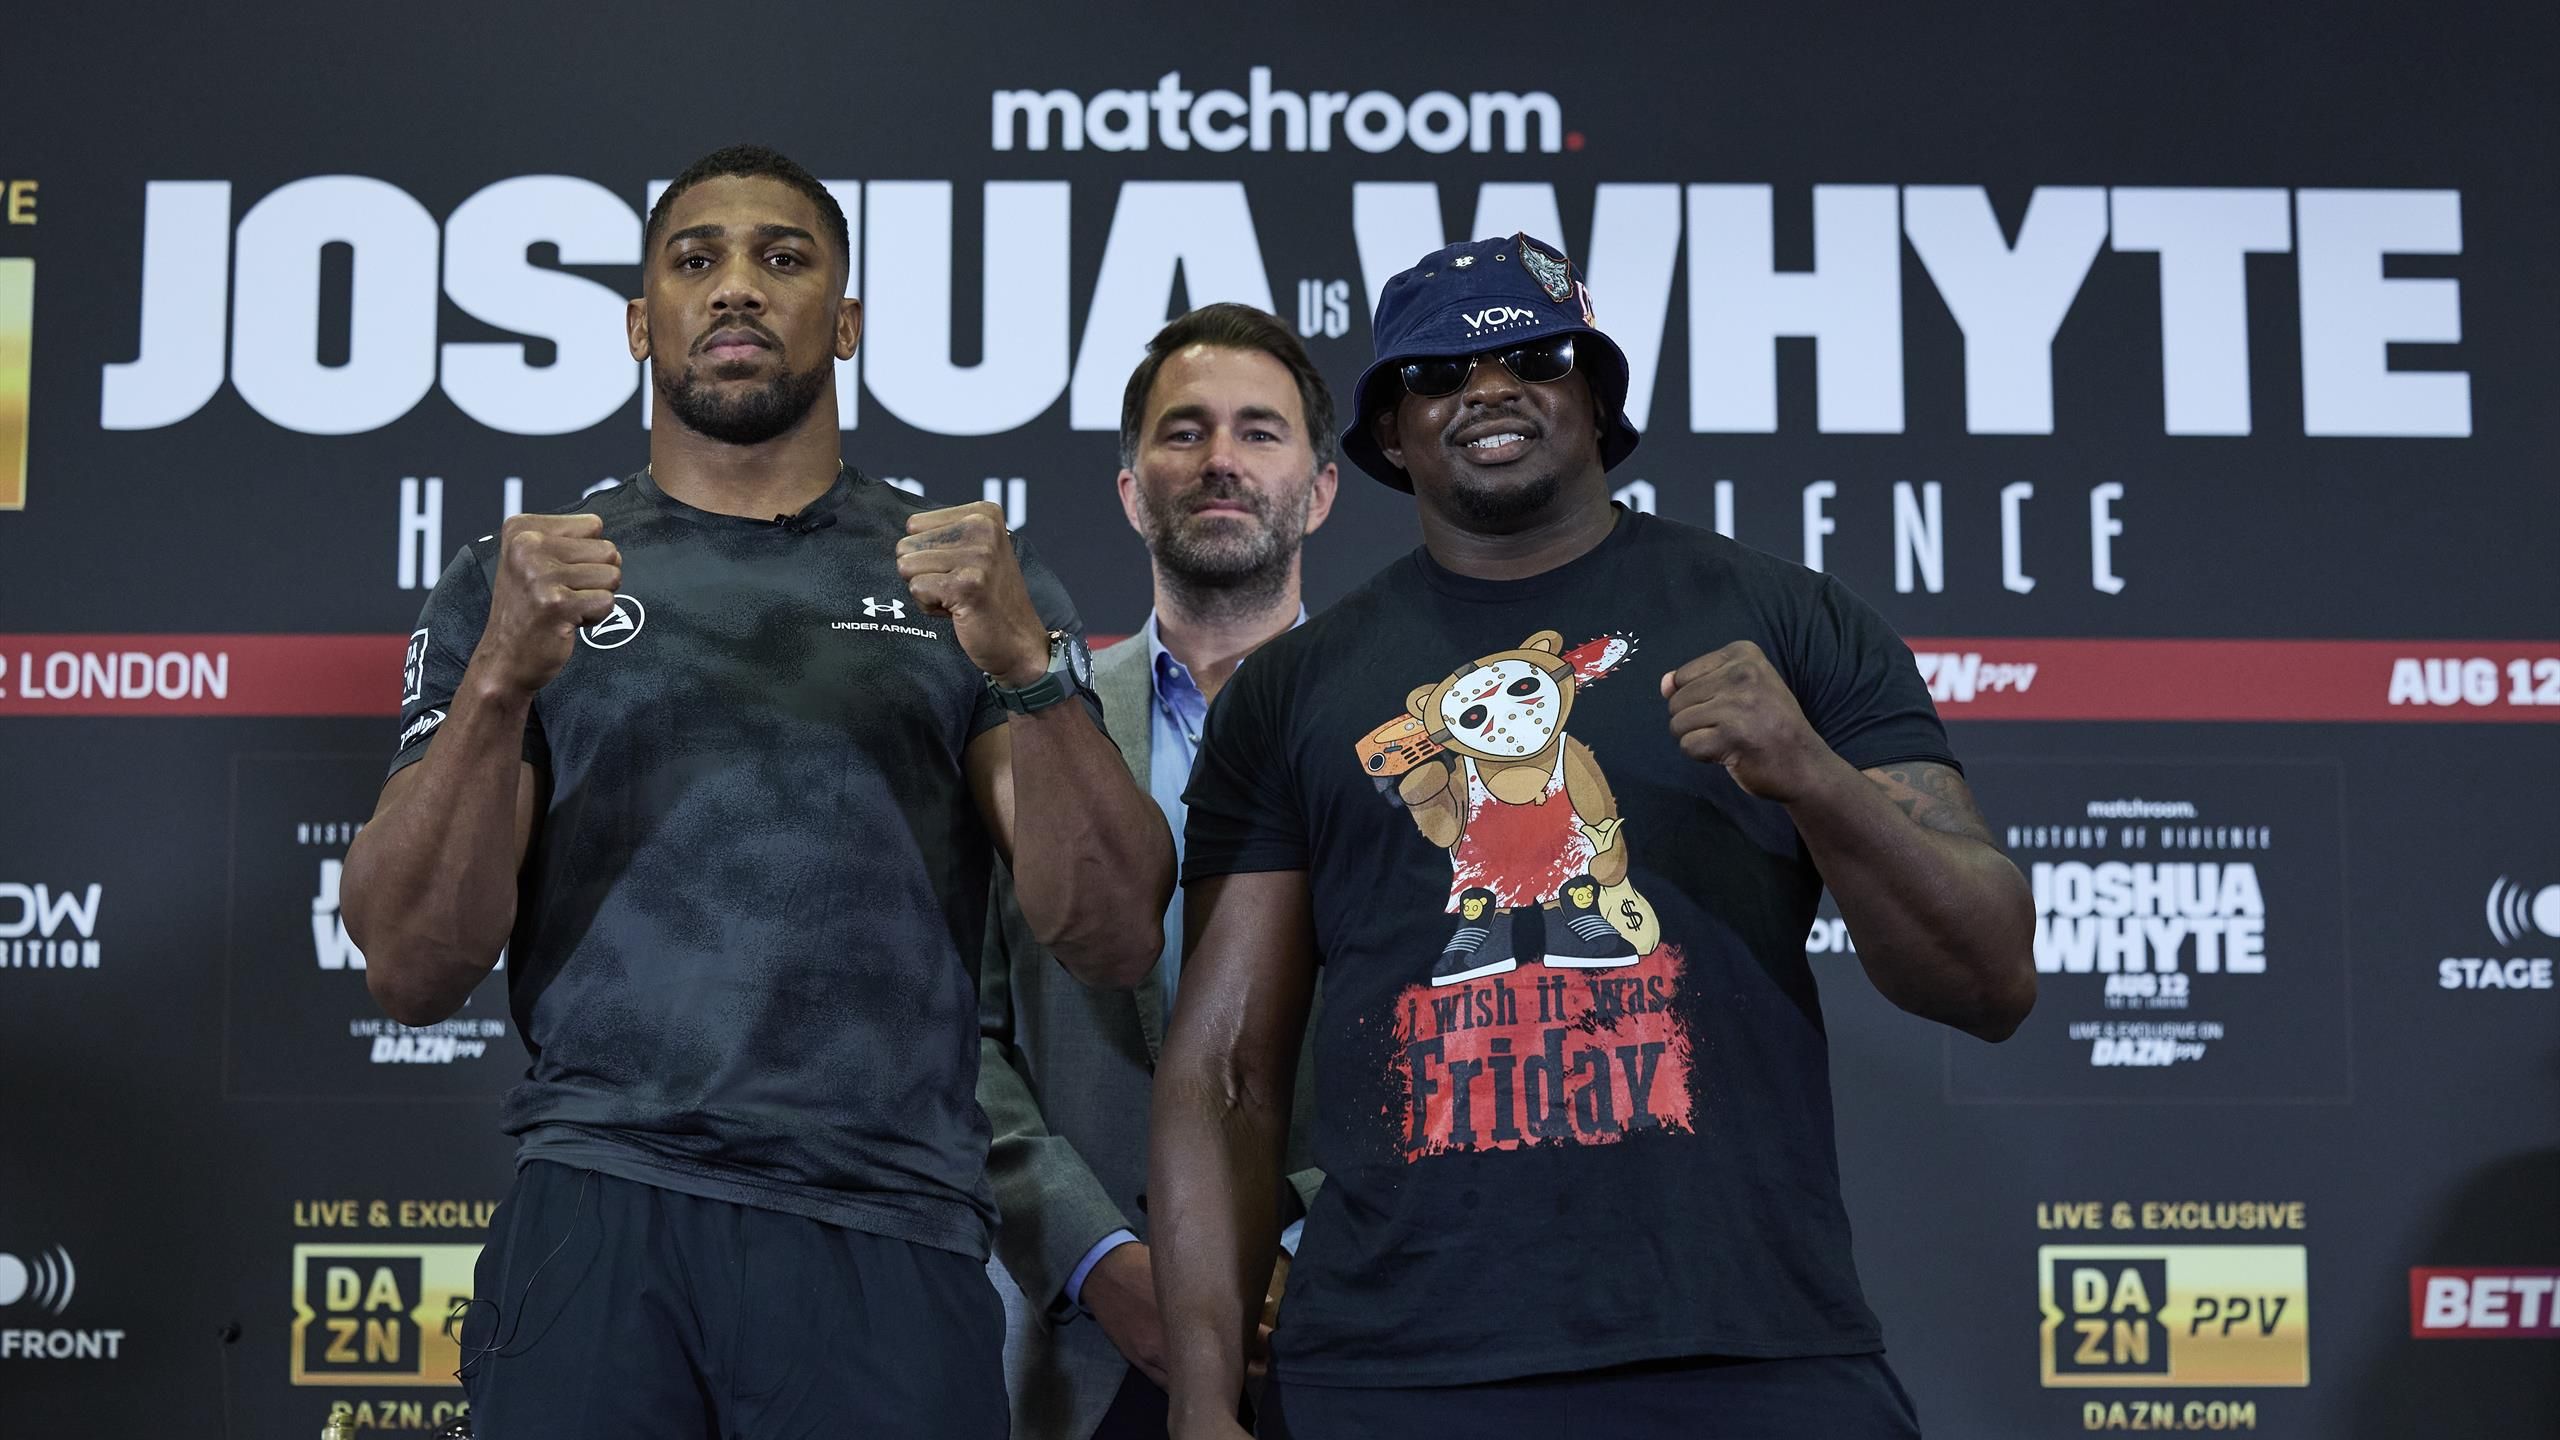 Anthony Joshua v Dillian Whyte 2 called off as Whyte returns adverse analytical findings